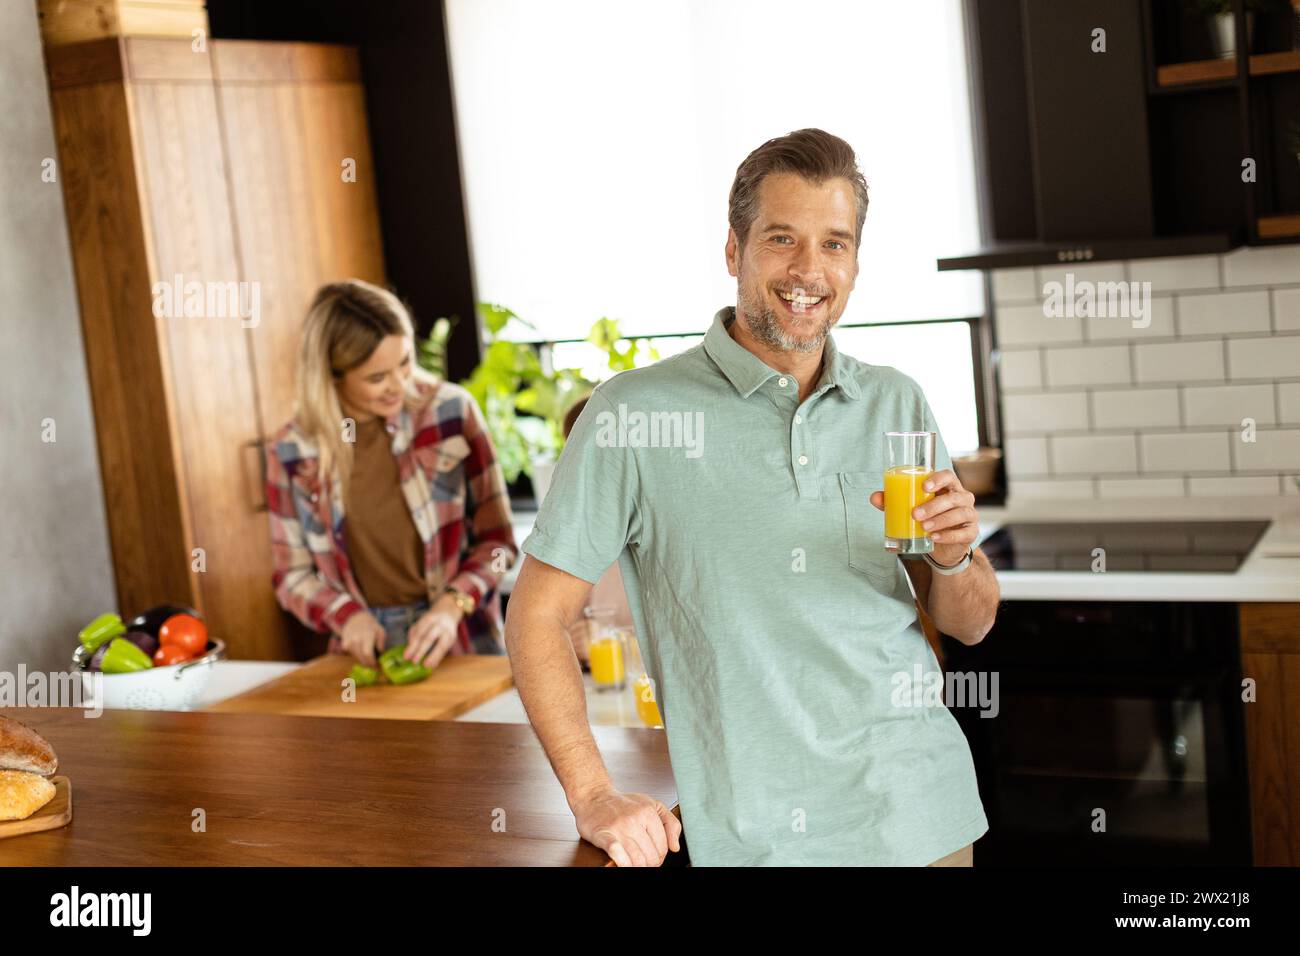 Smiling man holds a glass of juice while two women cook in a bright kitchen Stock Photo